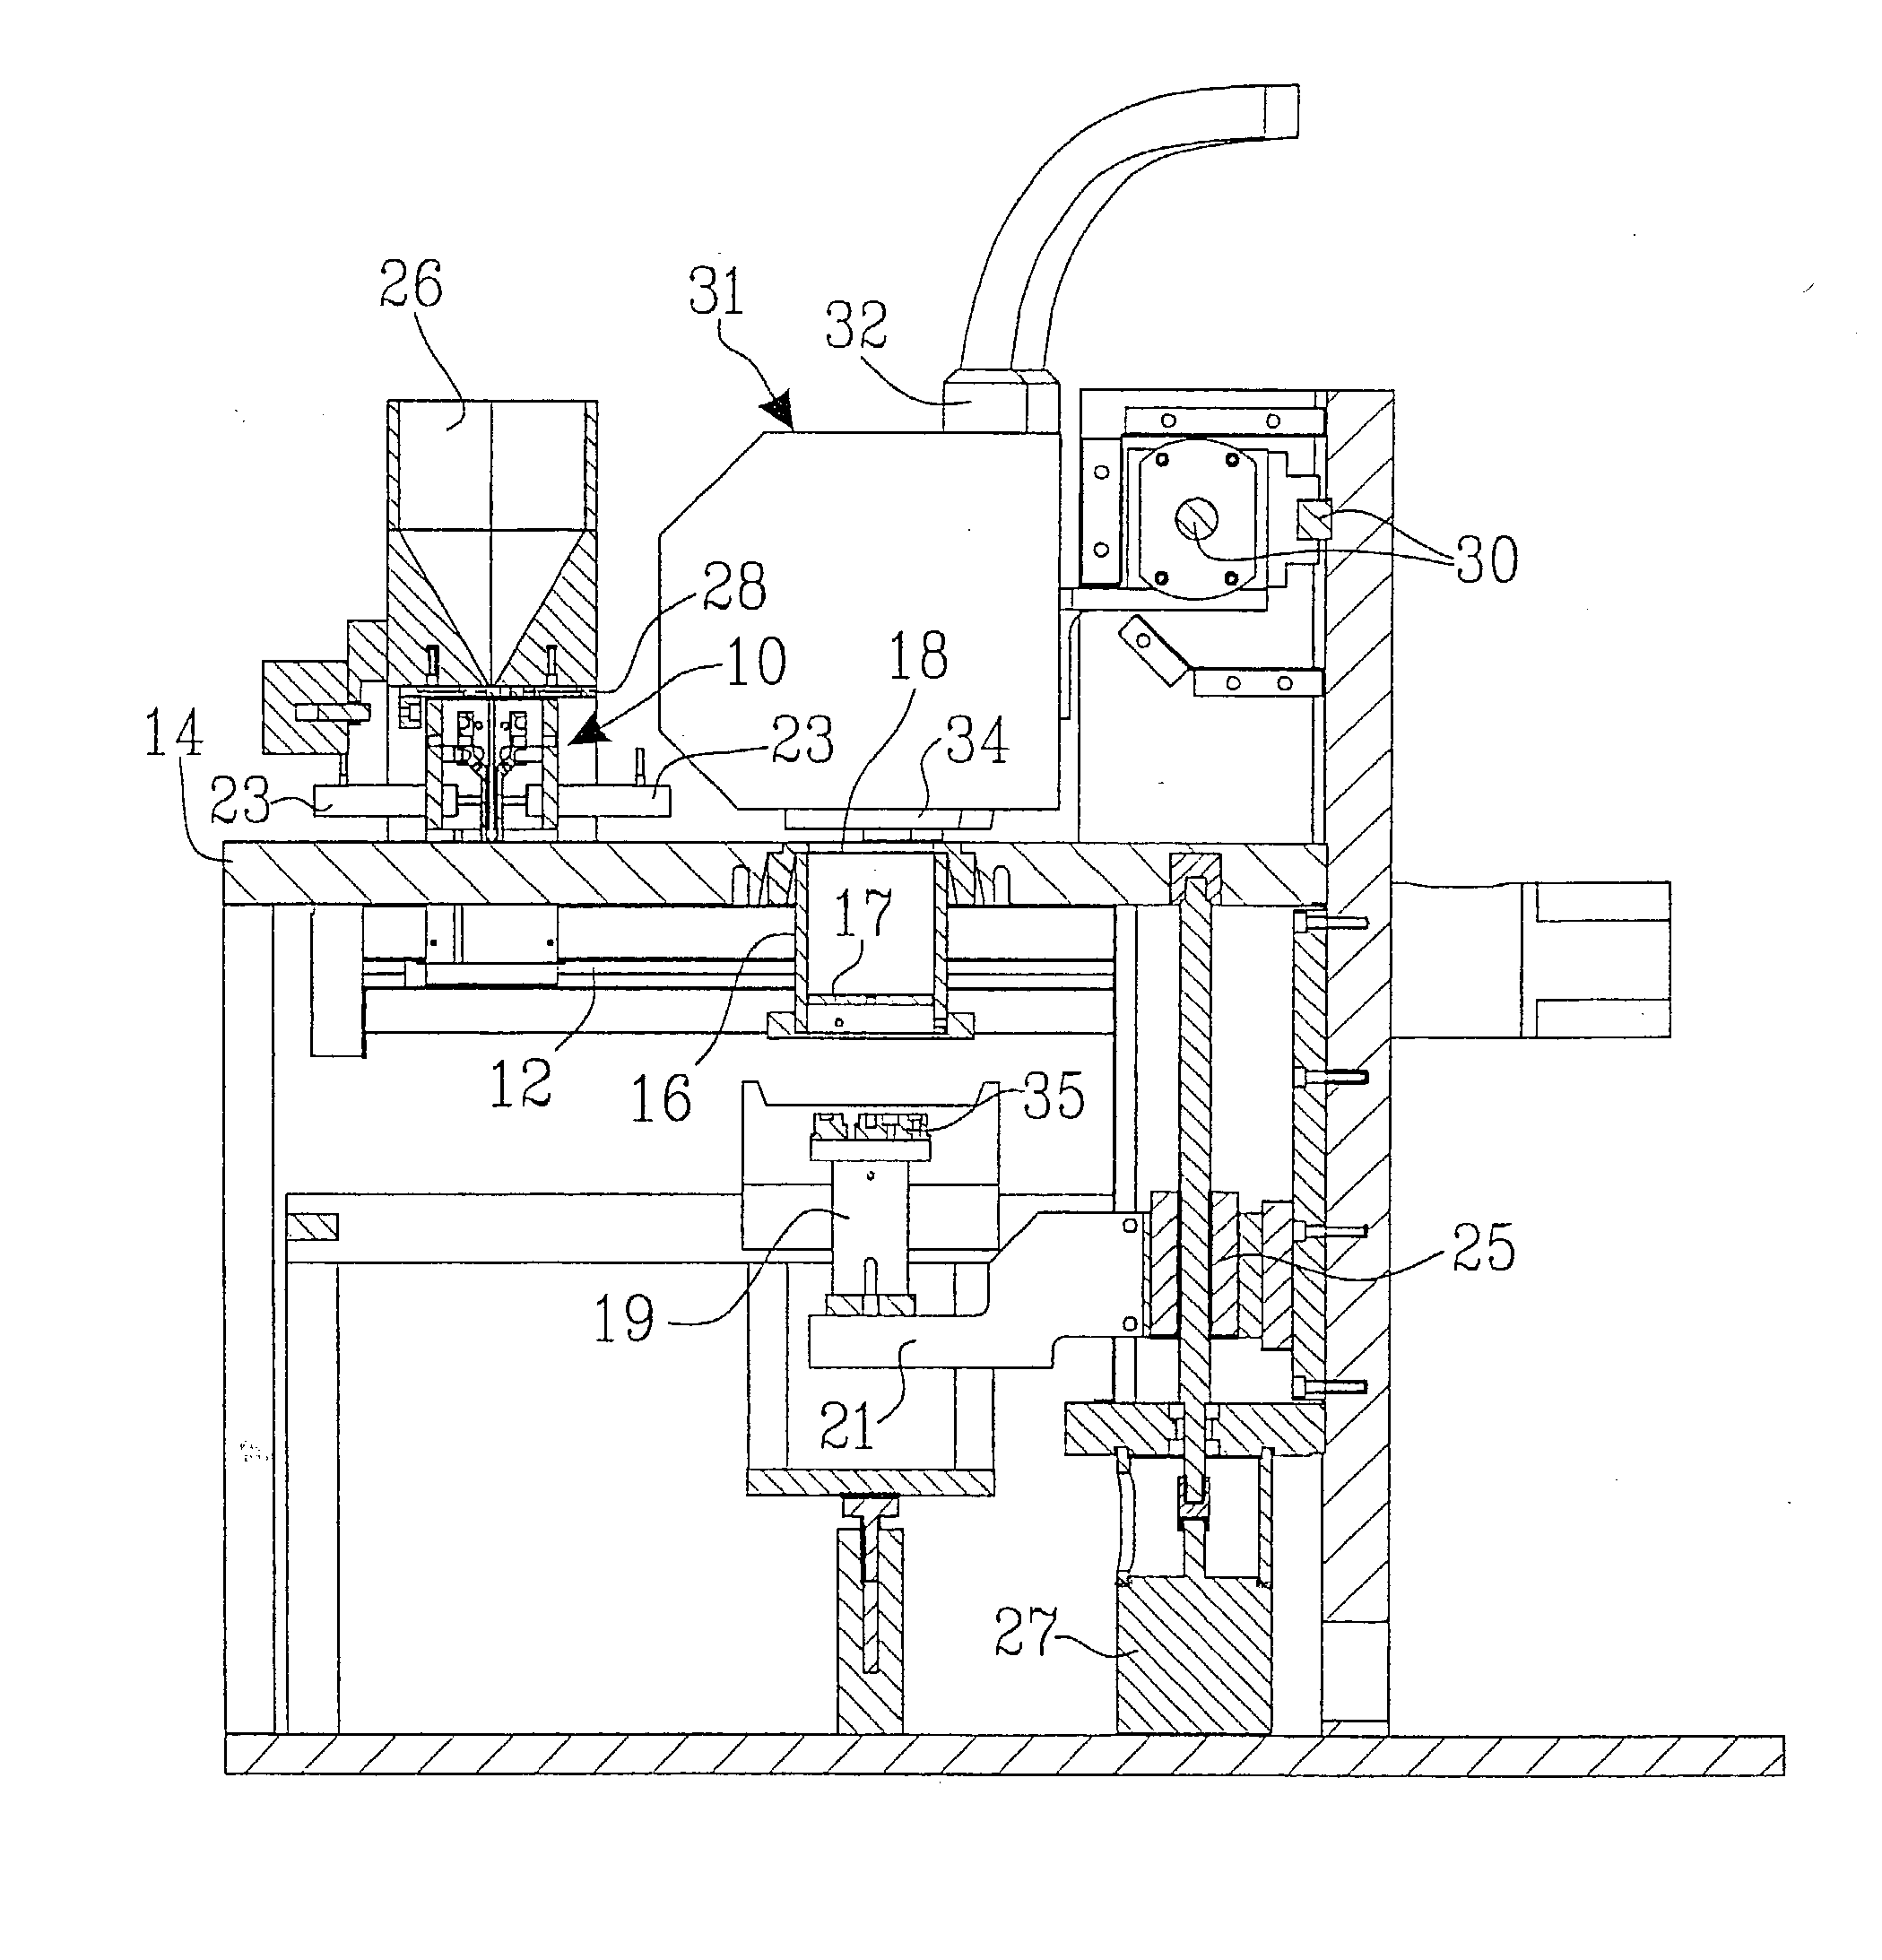 Method and apparatus for producing free-form products